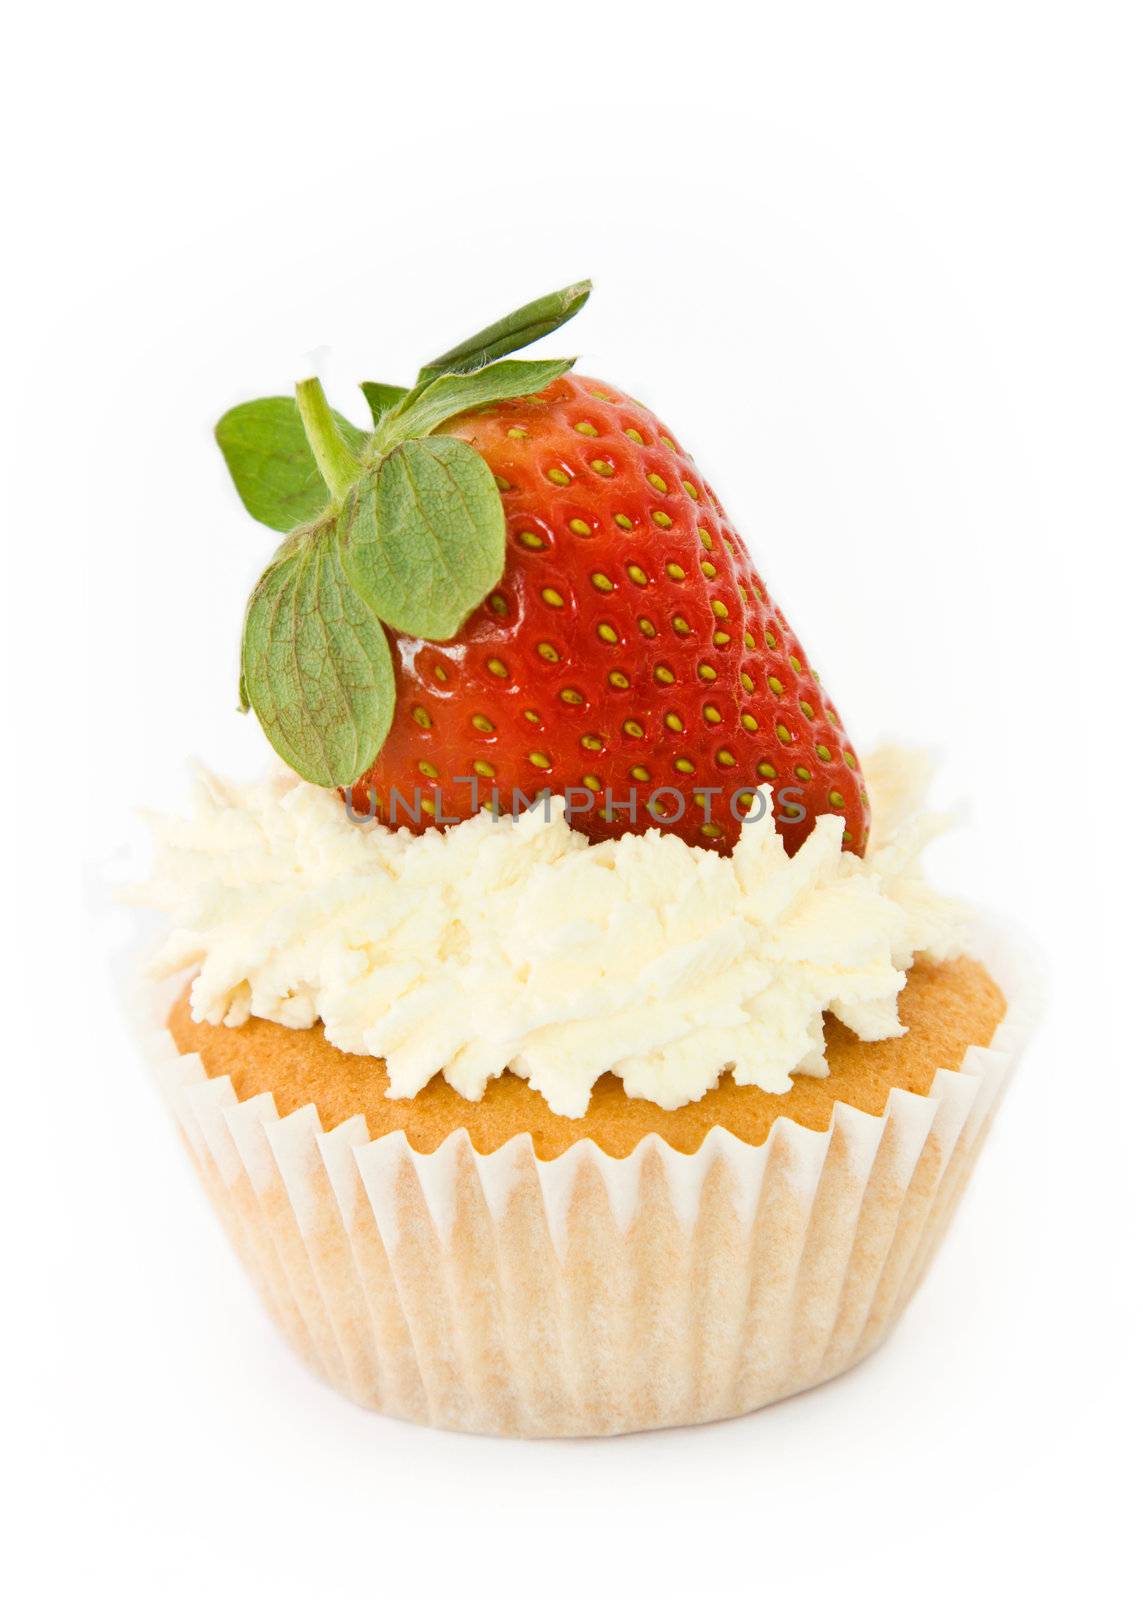 Cupcake decorated with cream and a whole strawberry